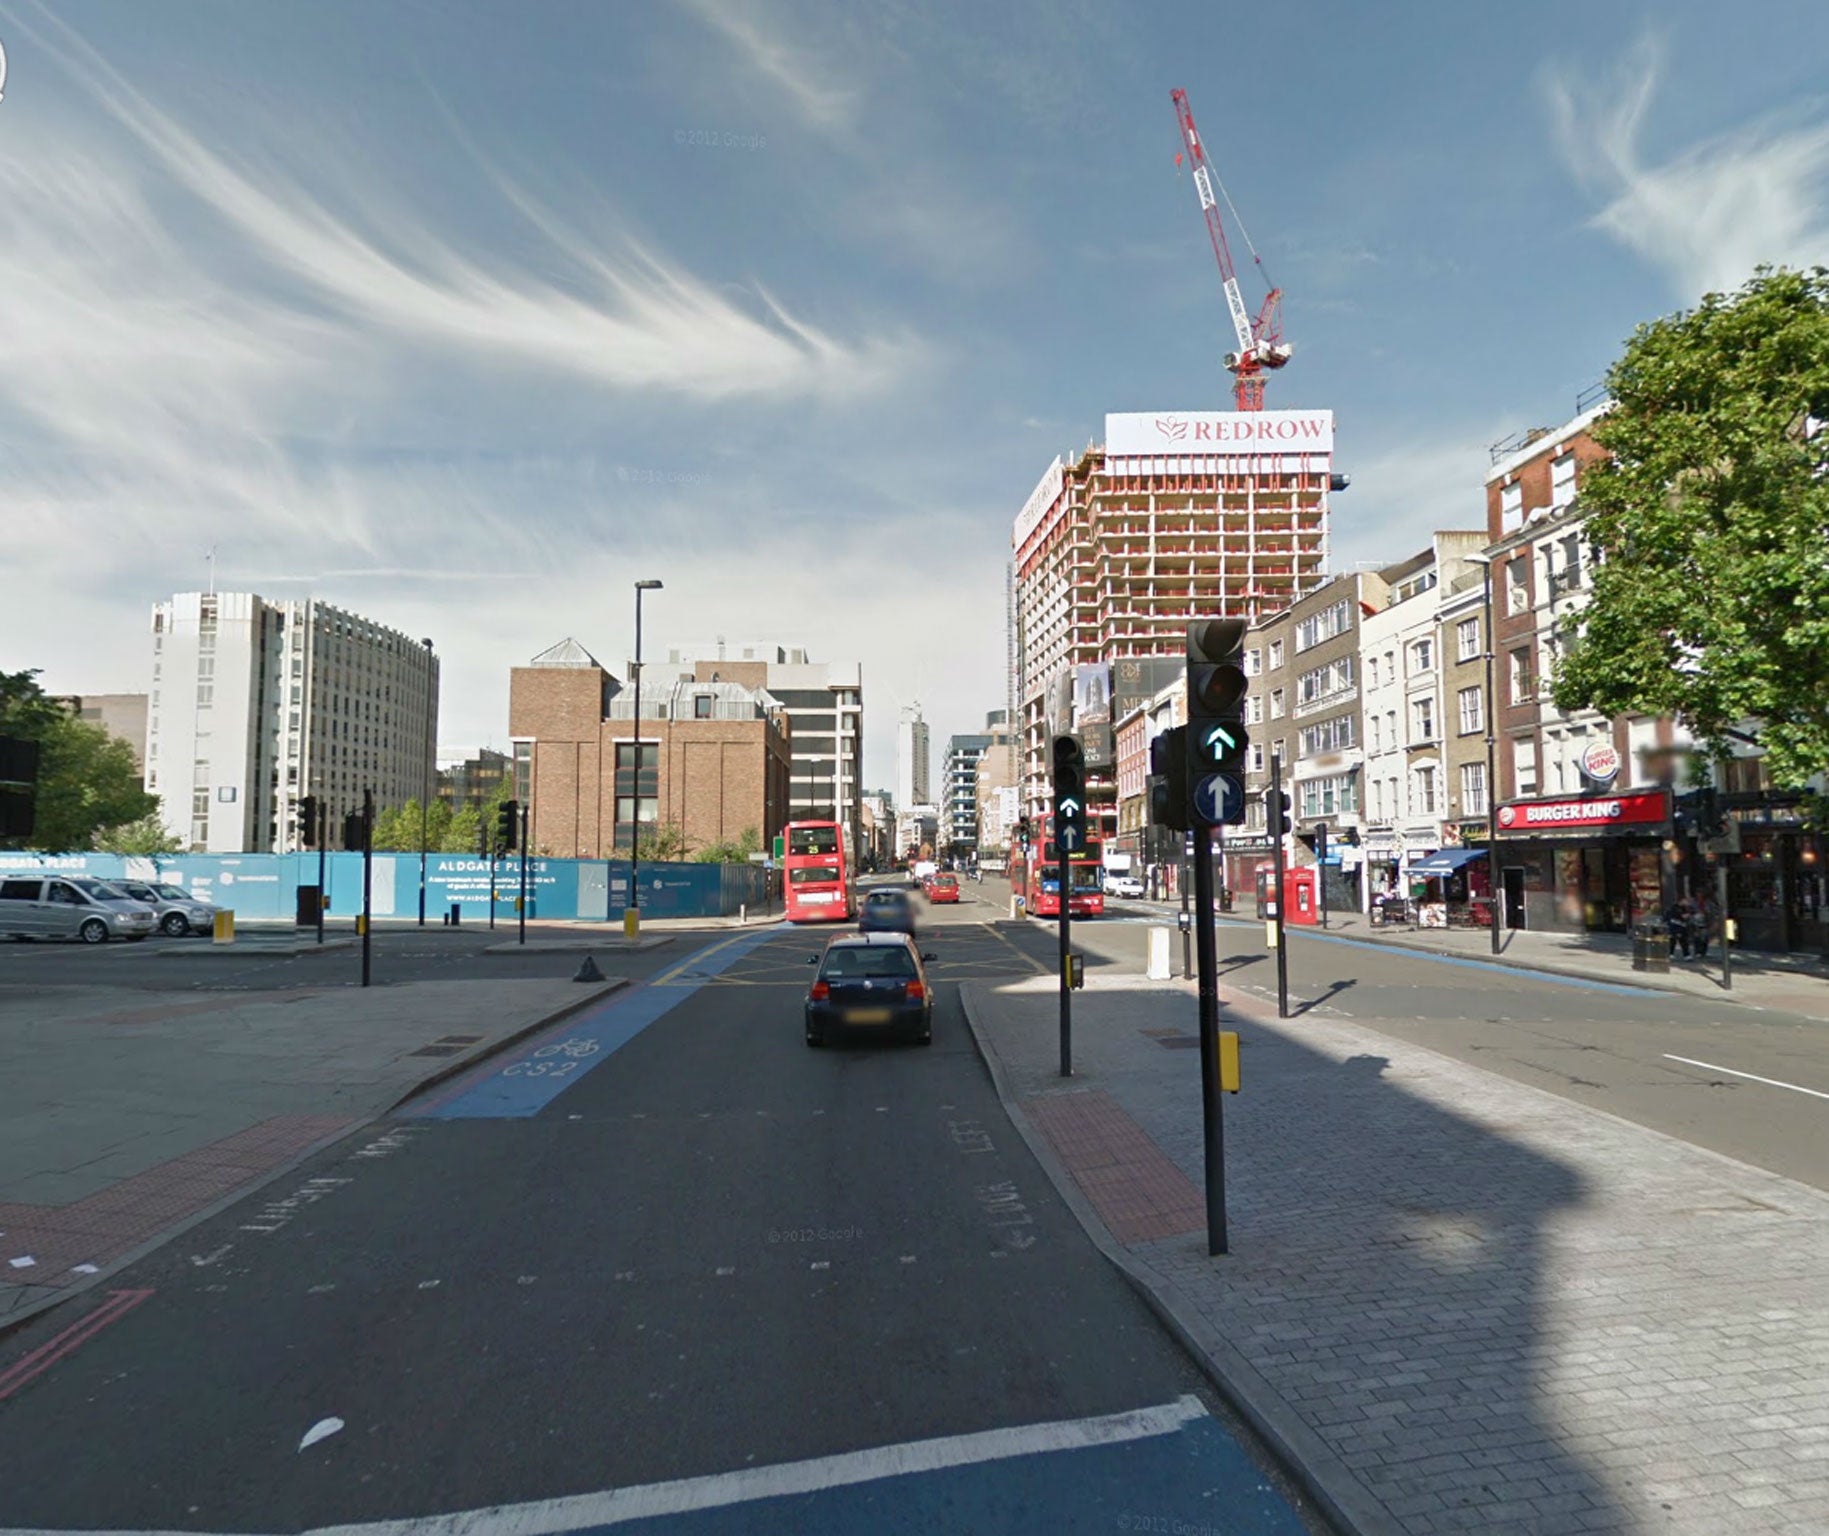 The unnamed man died in hospital at around 04:00 GMT this morning after the collision with a bus at the junction of Whitechapel Road and Commercial Road in Aldgate, east London, at around 11.30pm last night.